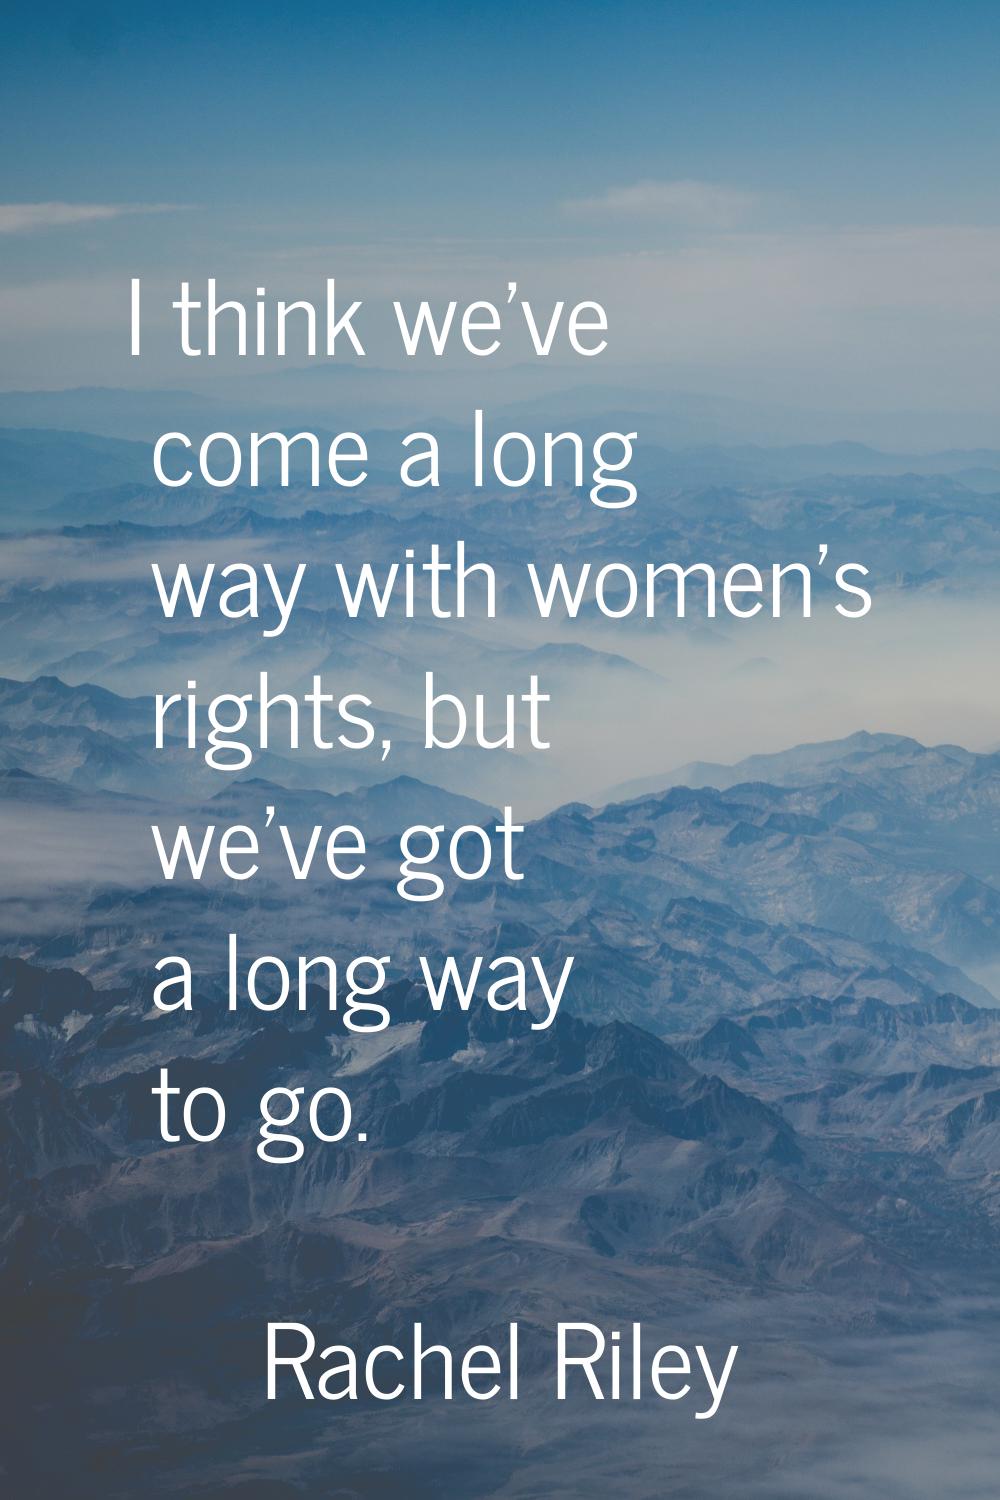 I think we've come a long way with women's rights, but we've got a long way to go.